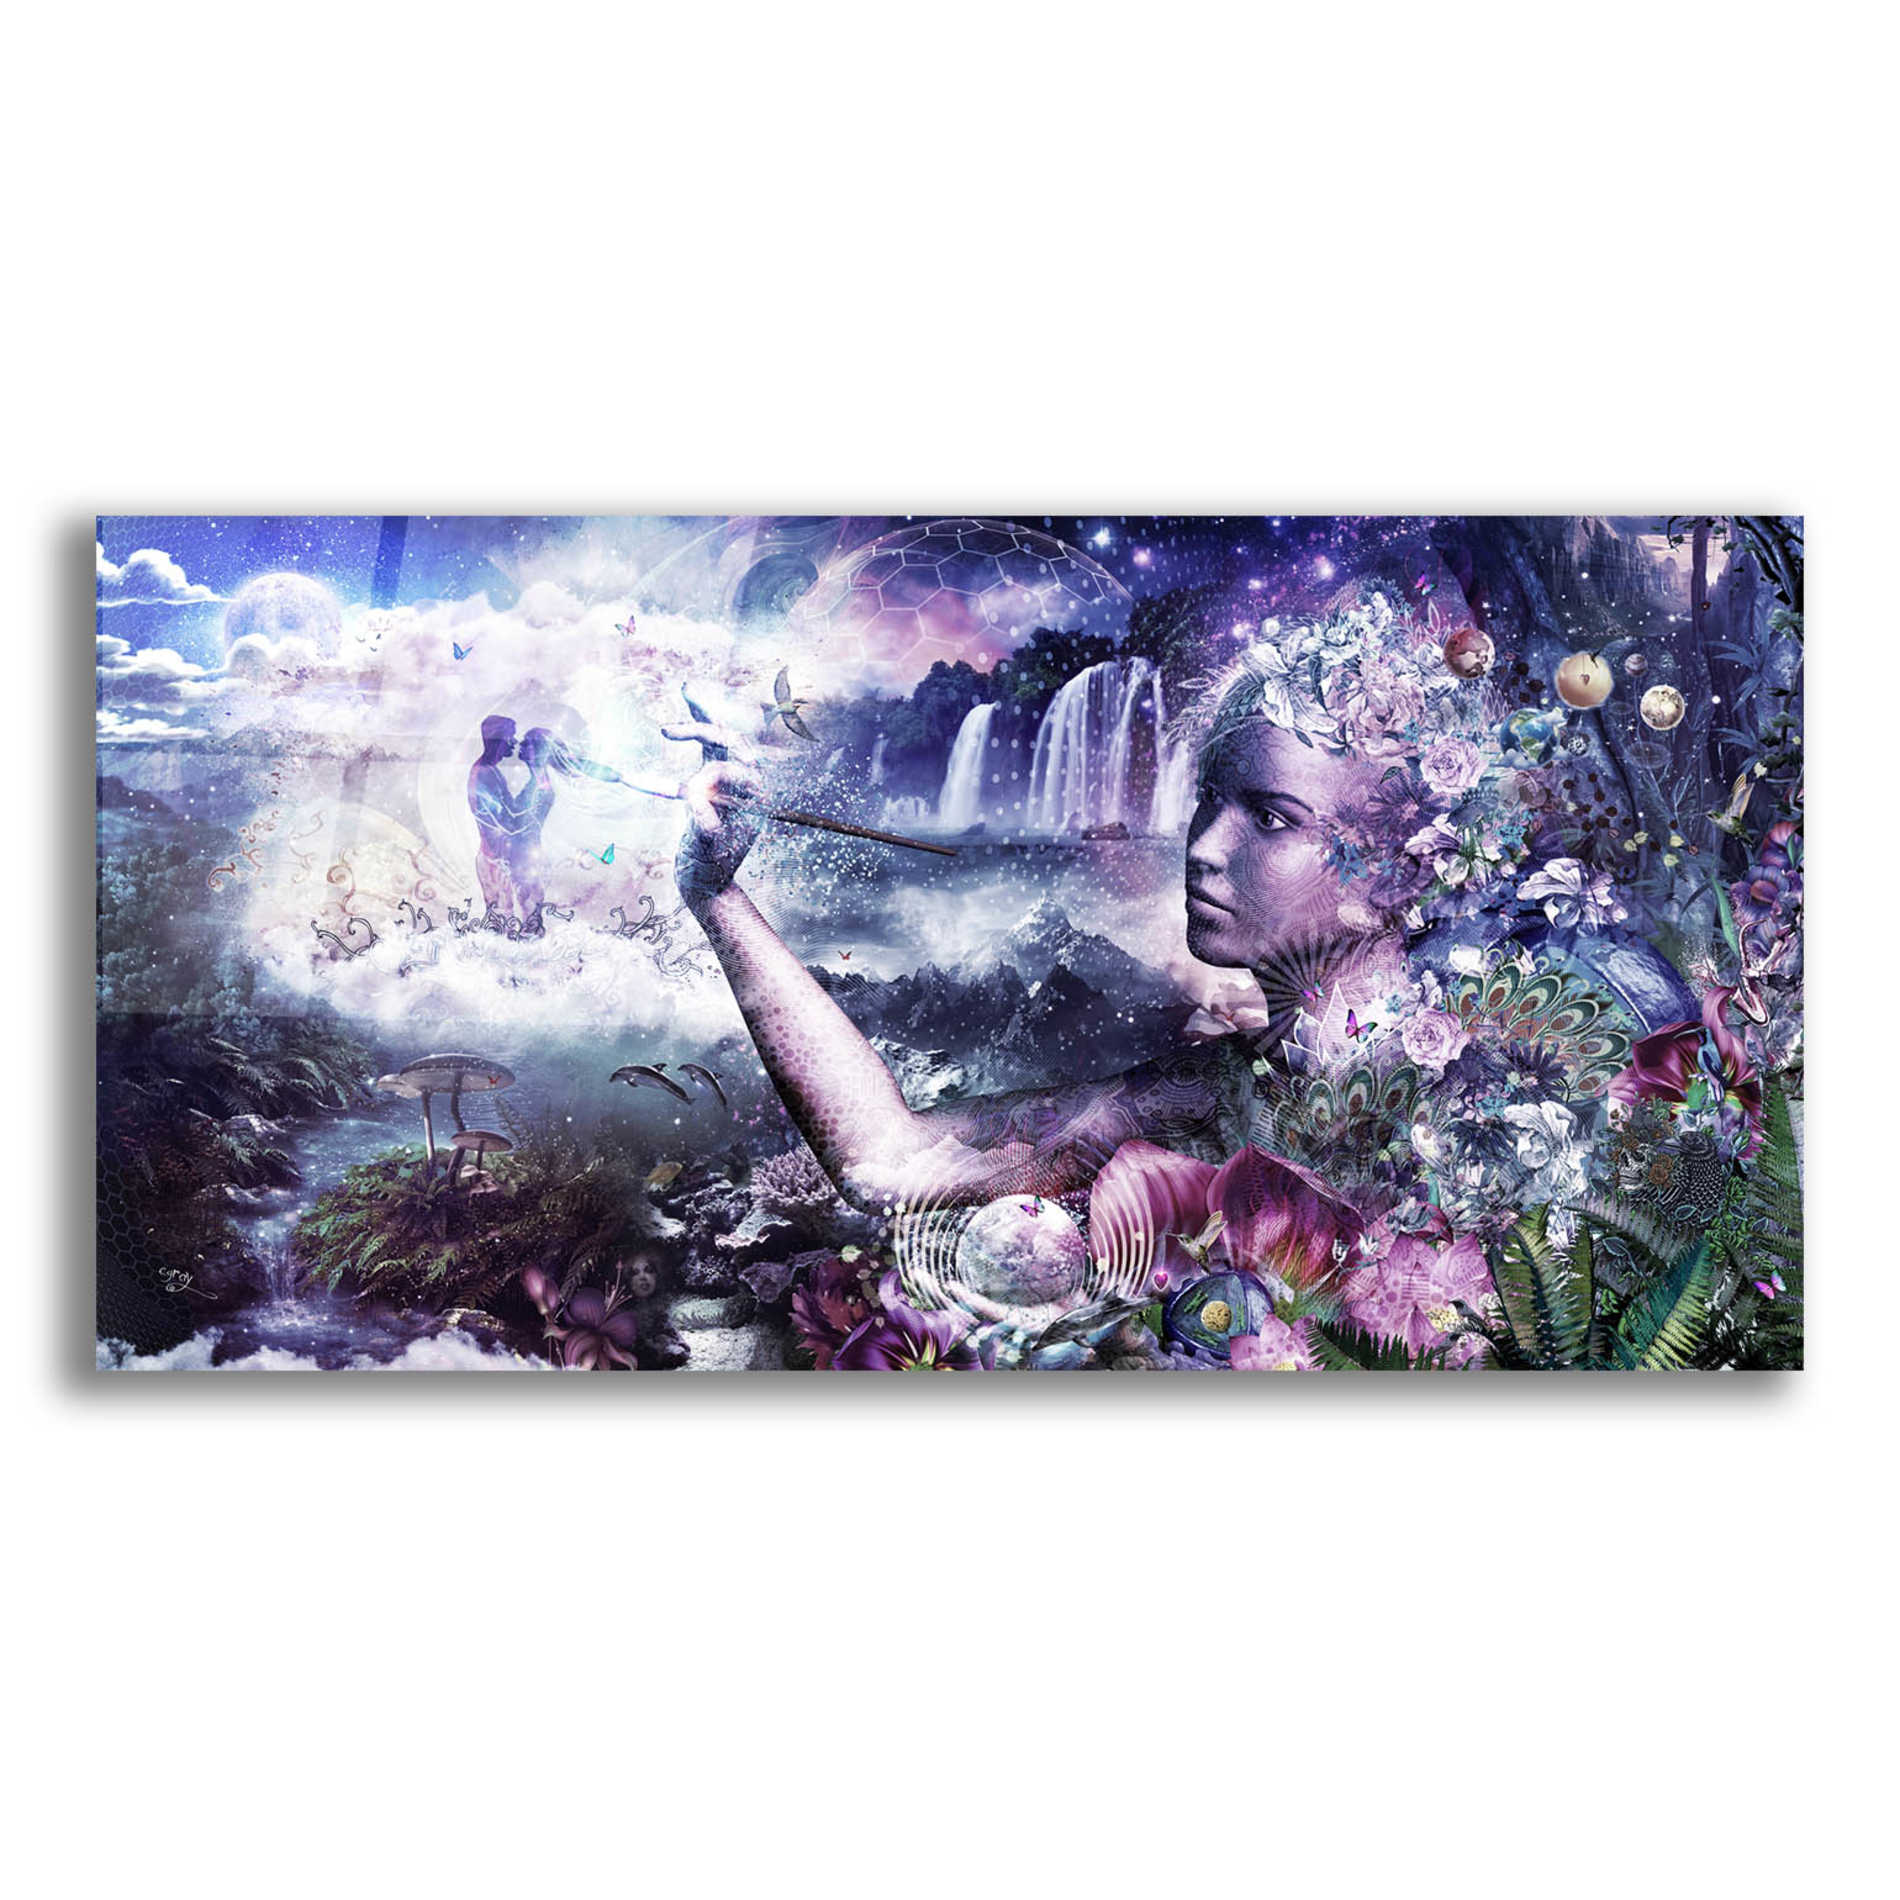 Epic Art 'The Painter' by Cameron Gray, Acrylic Glass Wall Art,24x12